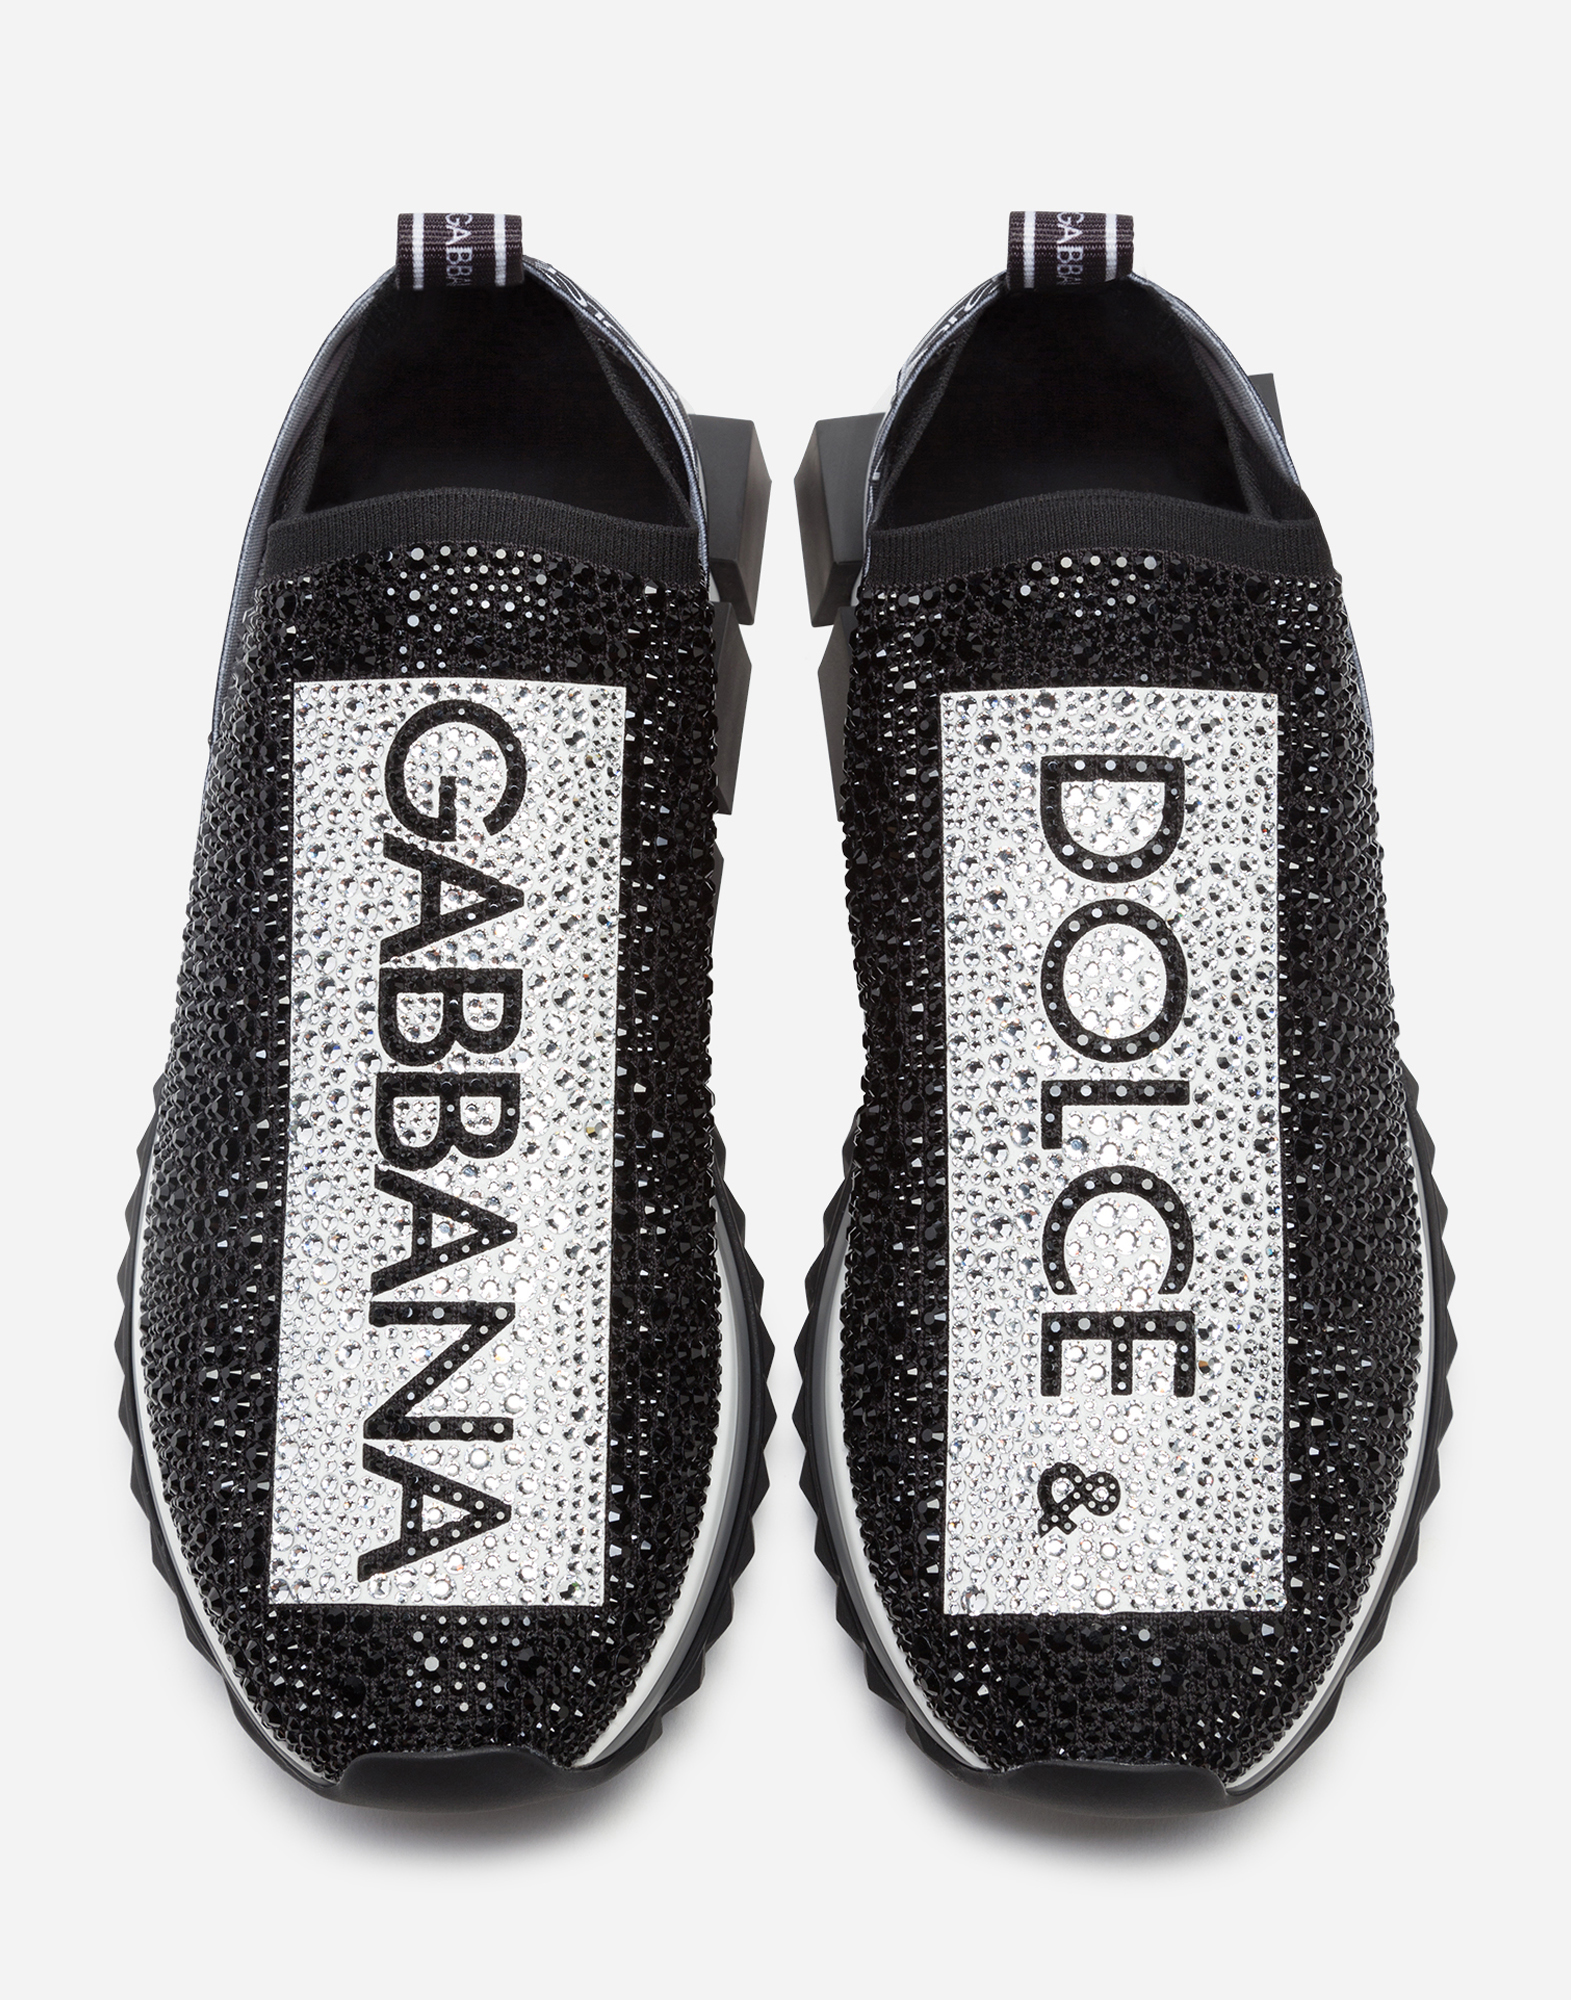 dolce and gabbana shoes with crystals